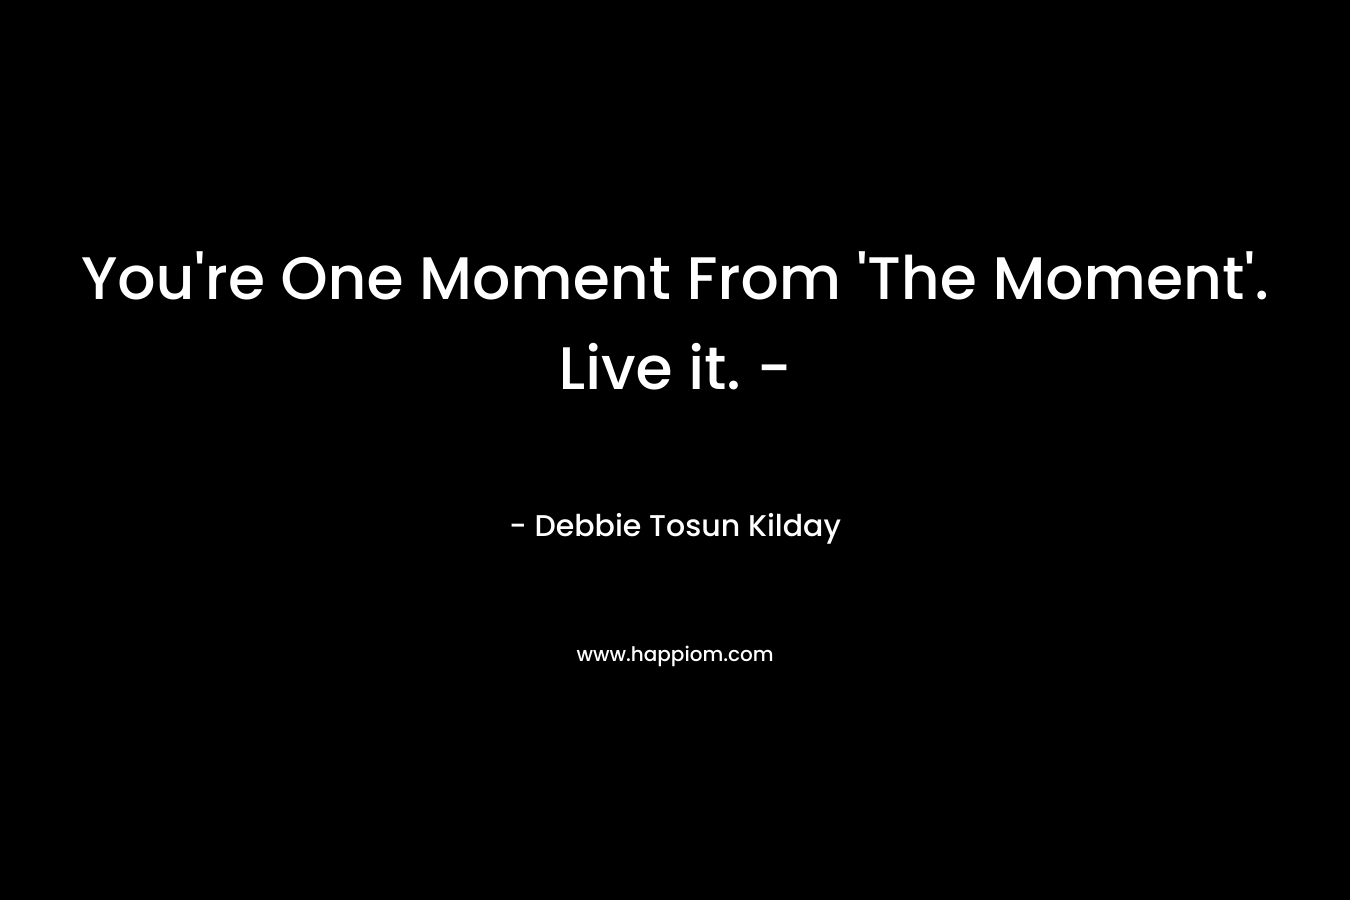 You're One Moment From 'The Moment'. Live it. -